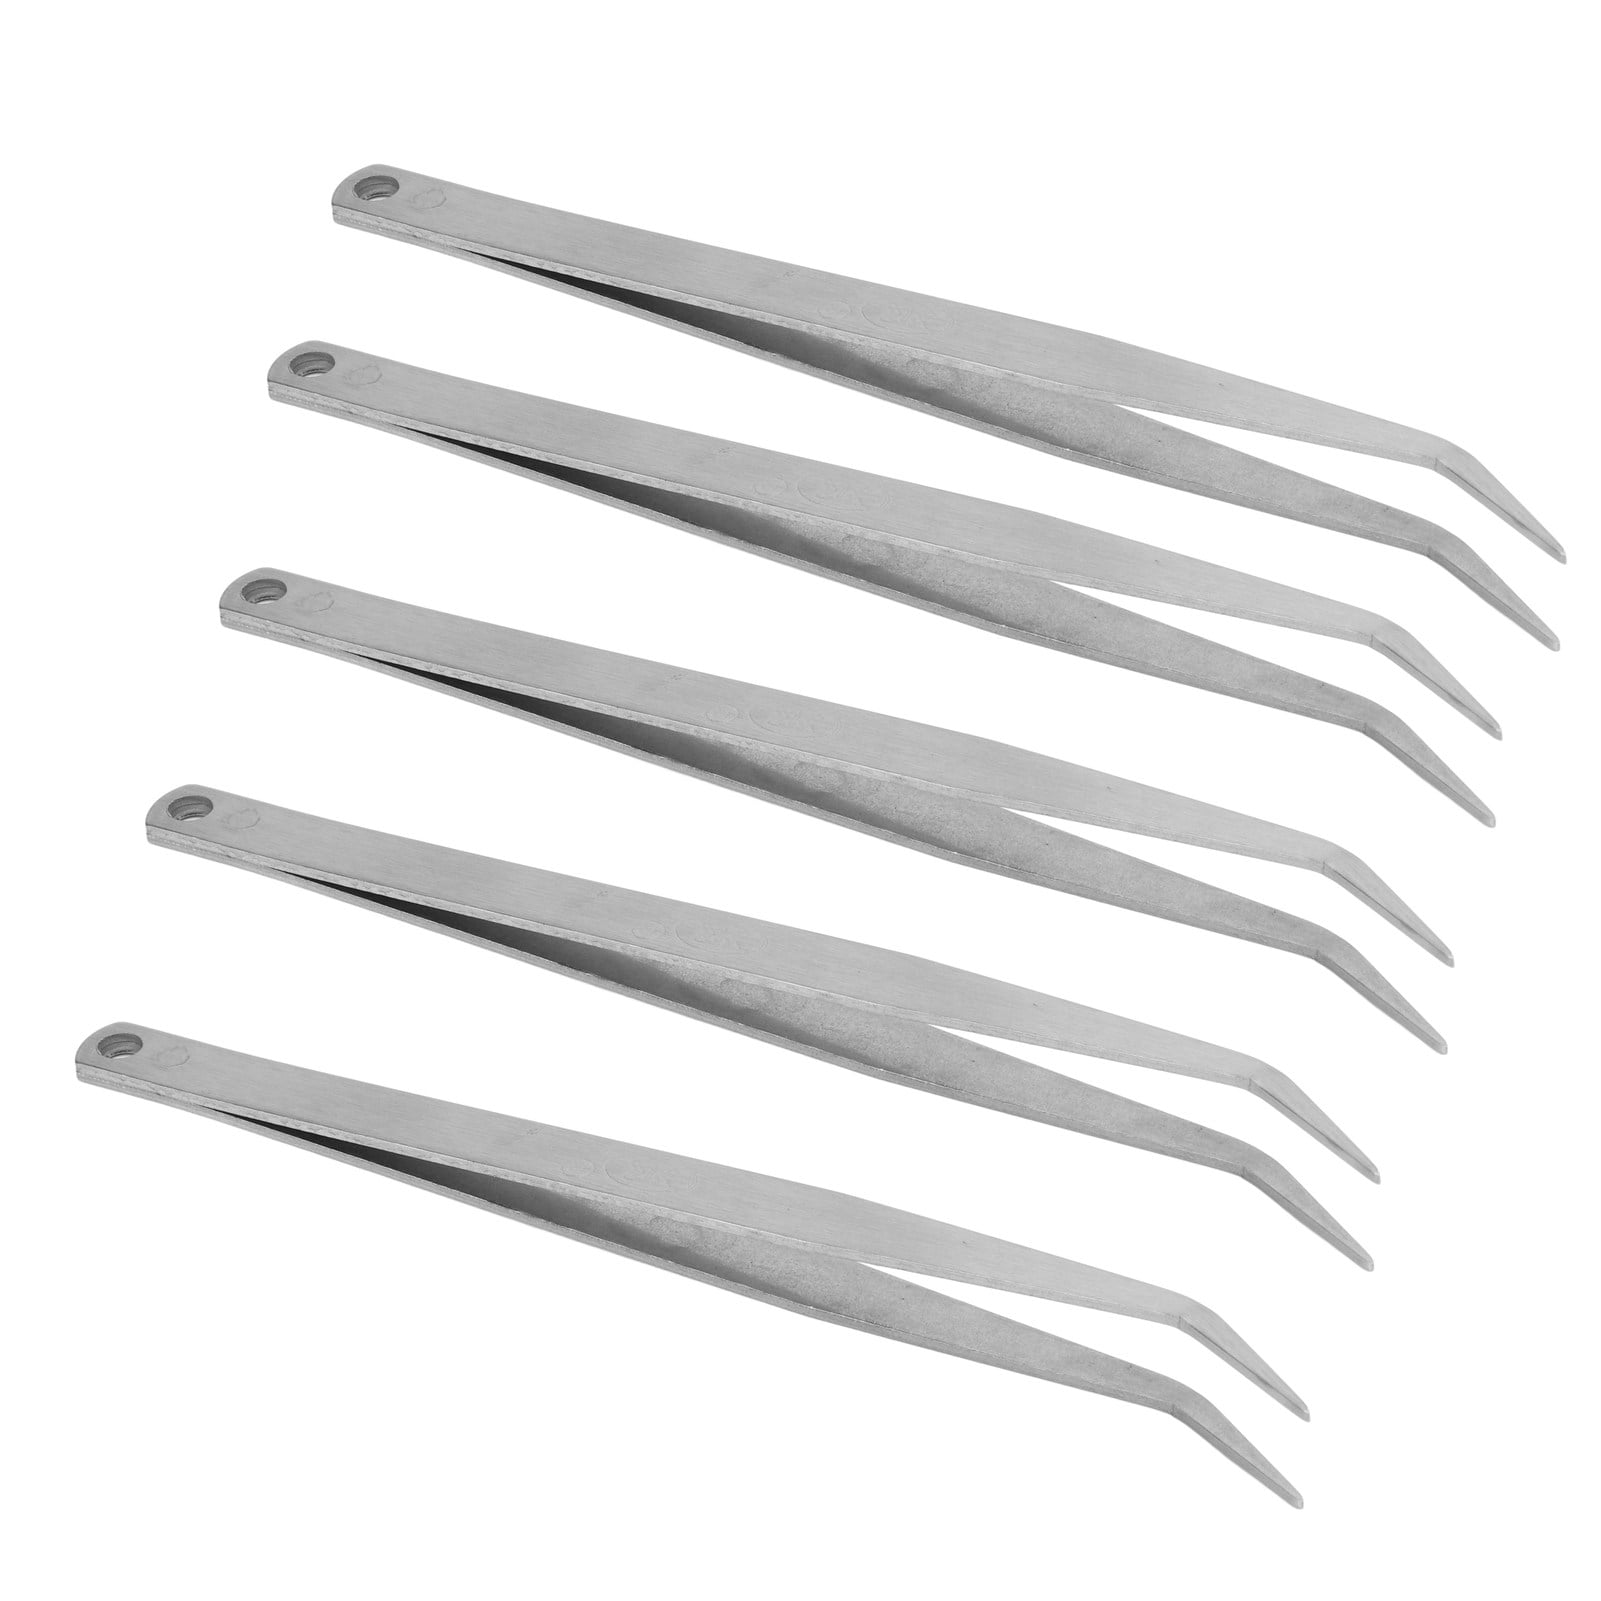 Sewing Tweezers, 5Pcs Stainless Steel Exquisite Workmanship Curved Sewing  Tweezers Curved Fine Tip For Sewing Machine For DIY Crafts 